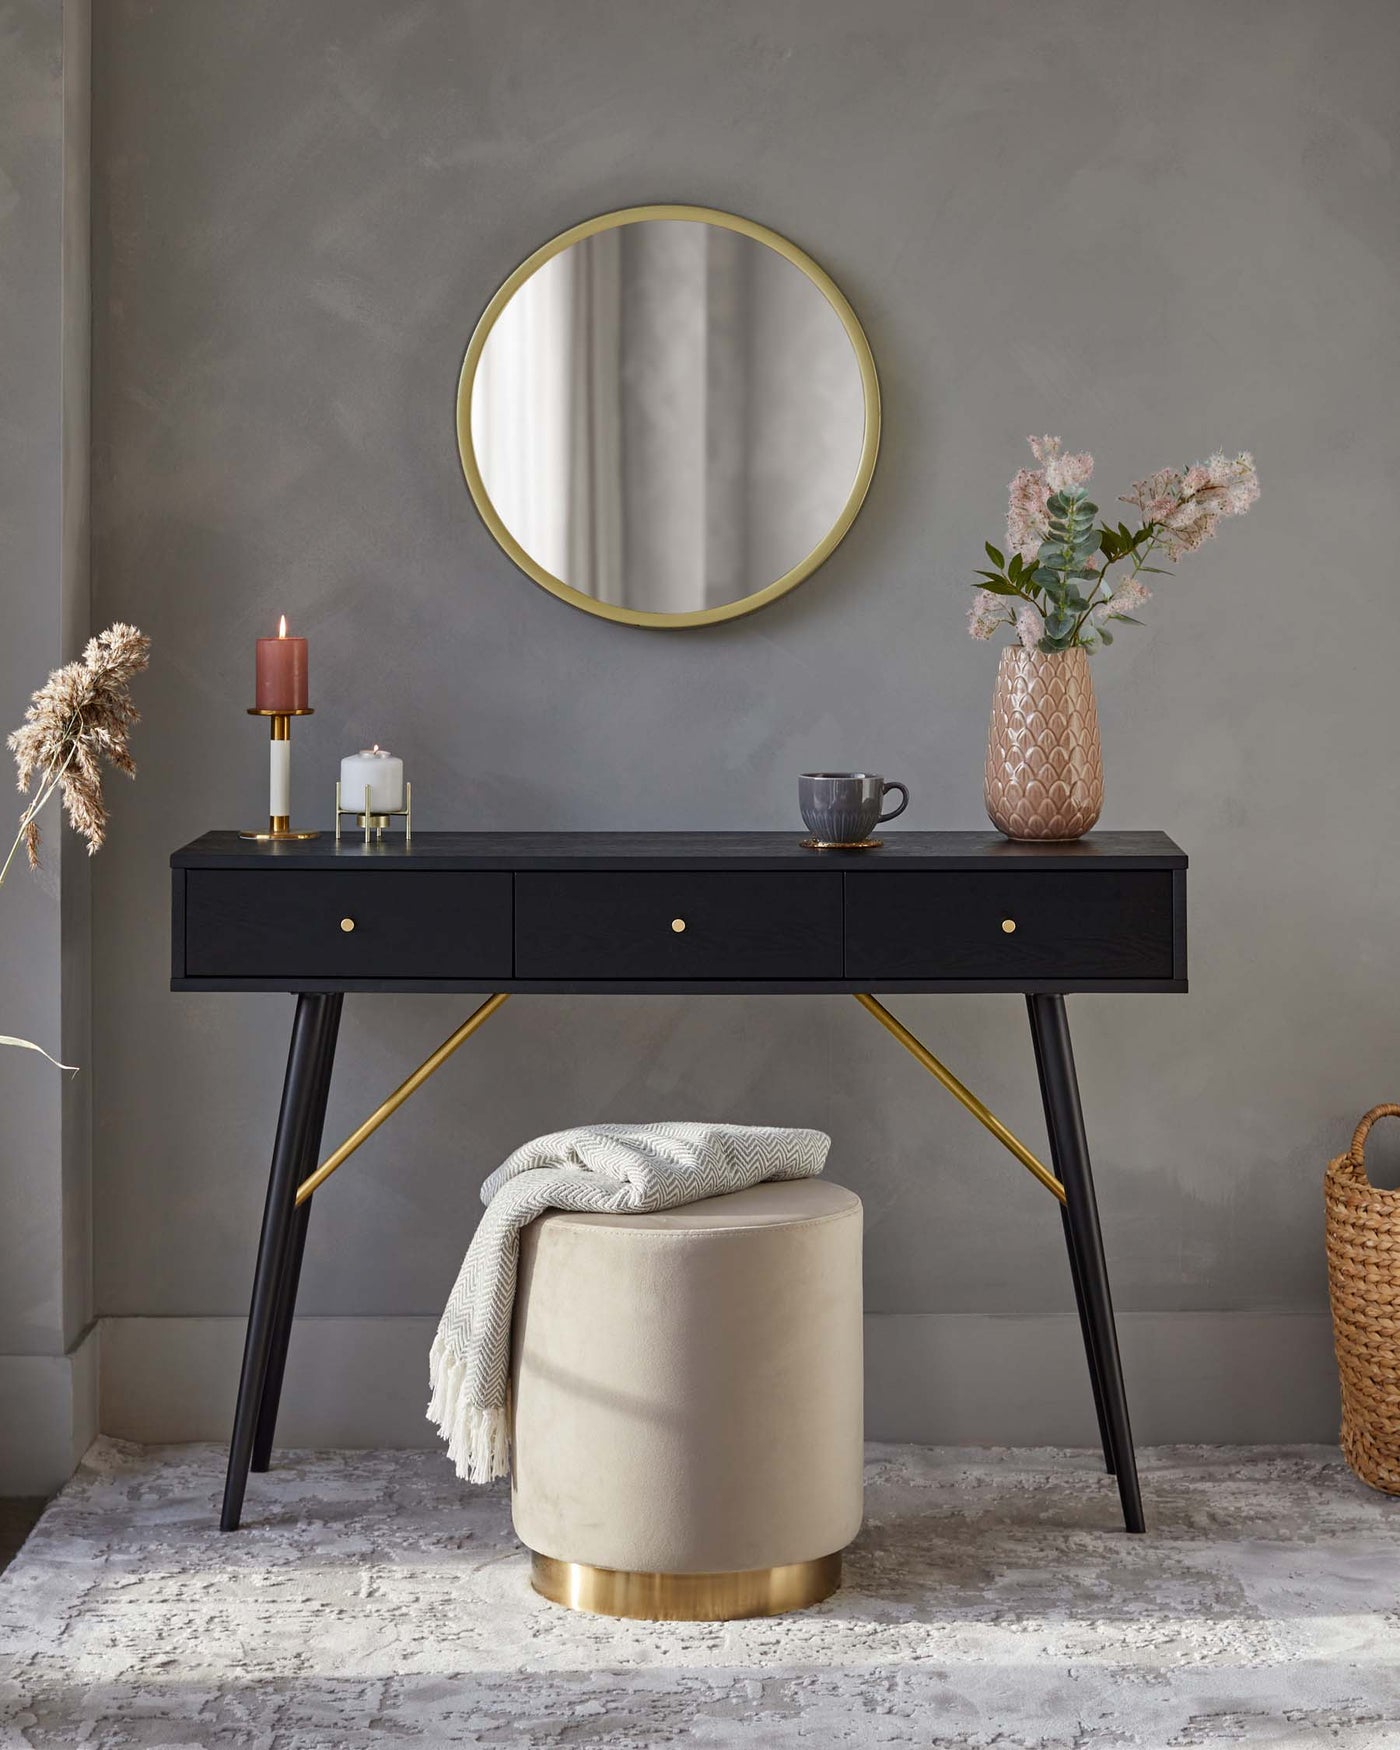 Elegant black console table with sleek brass accents and an upholstered beige round ottoman with a brass base.